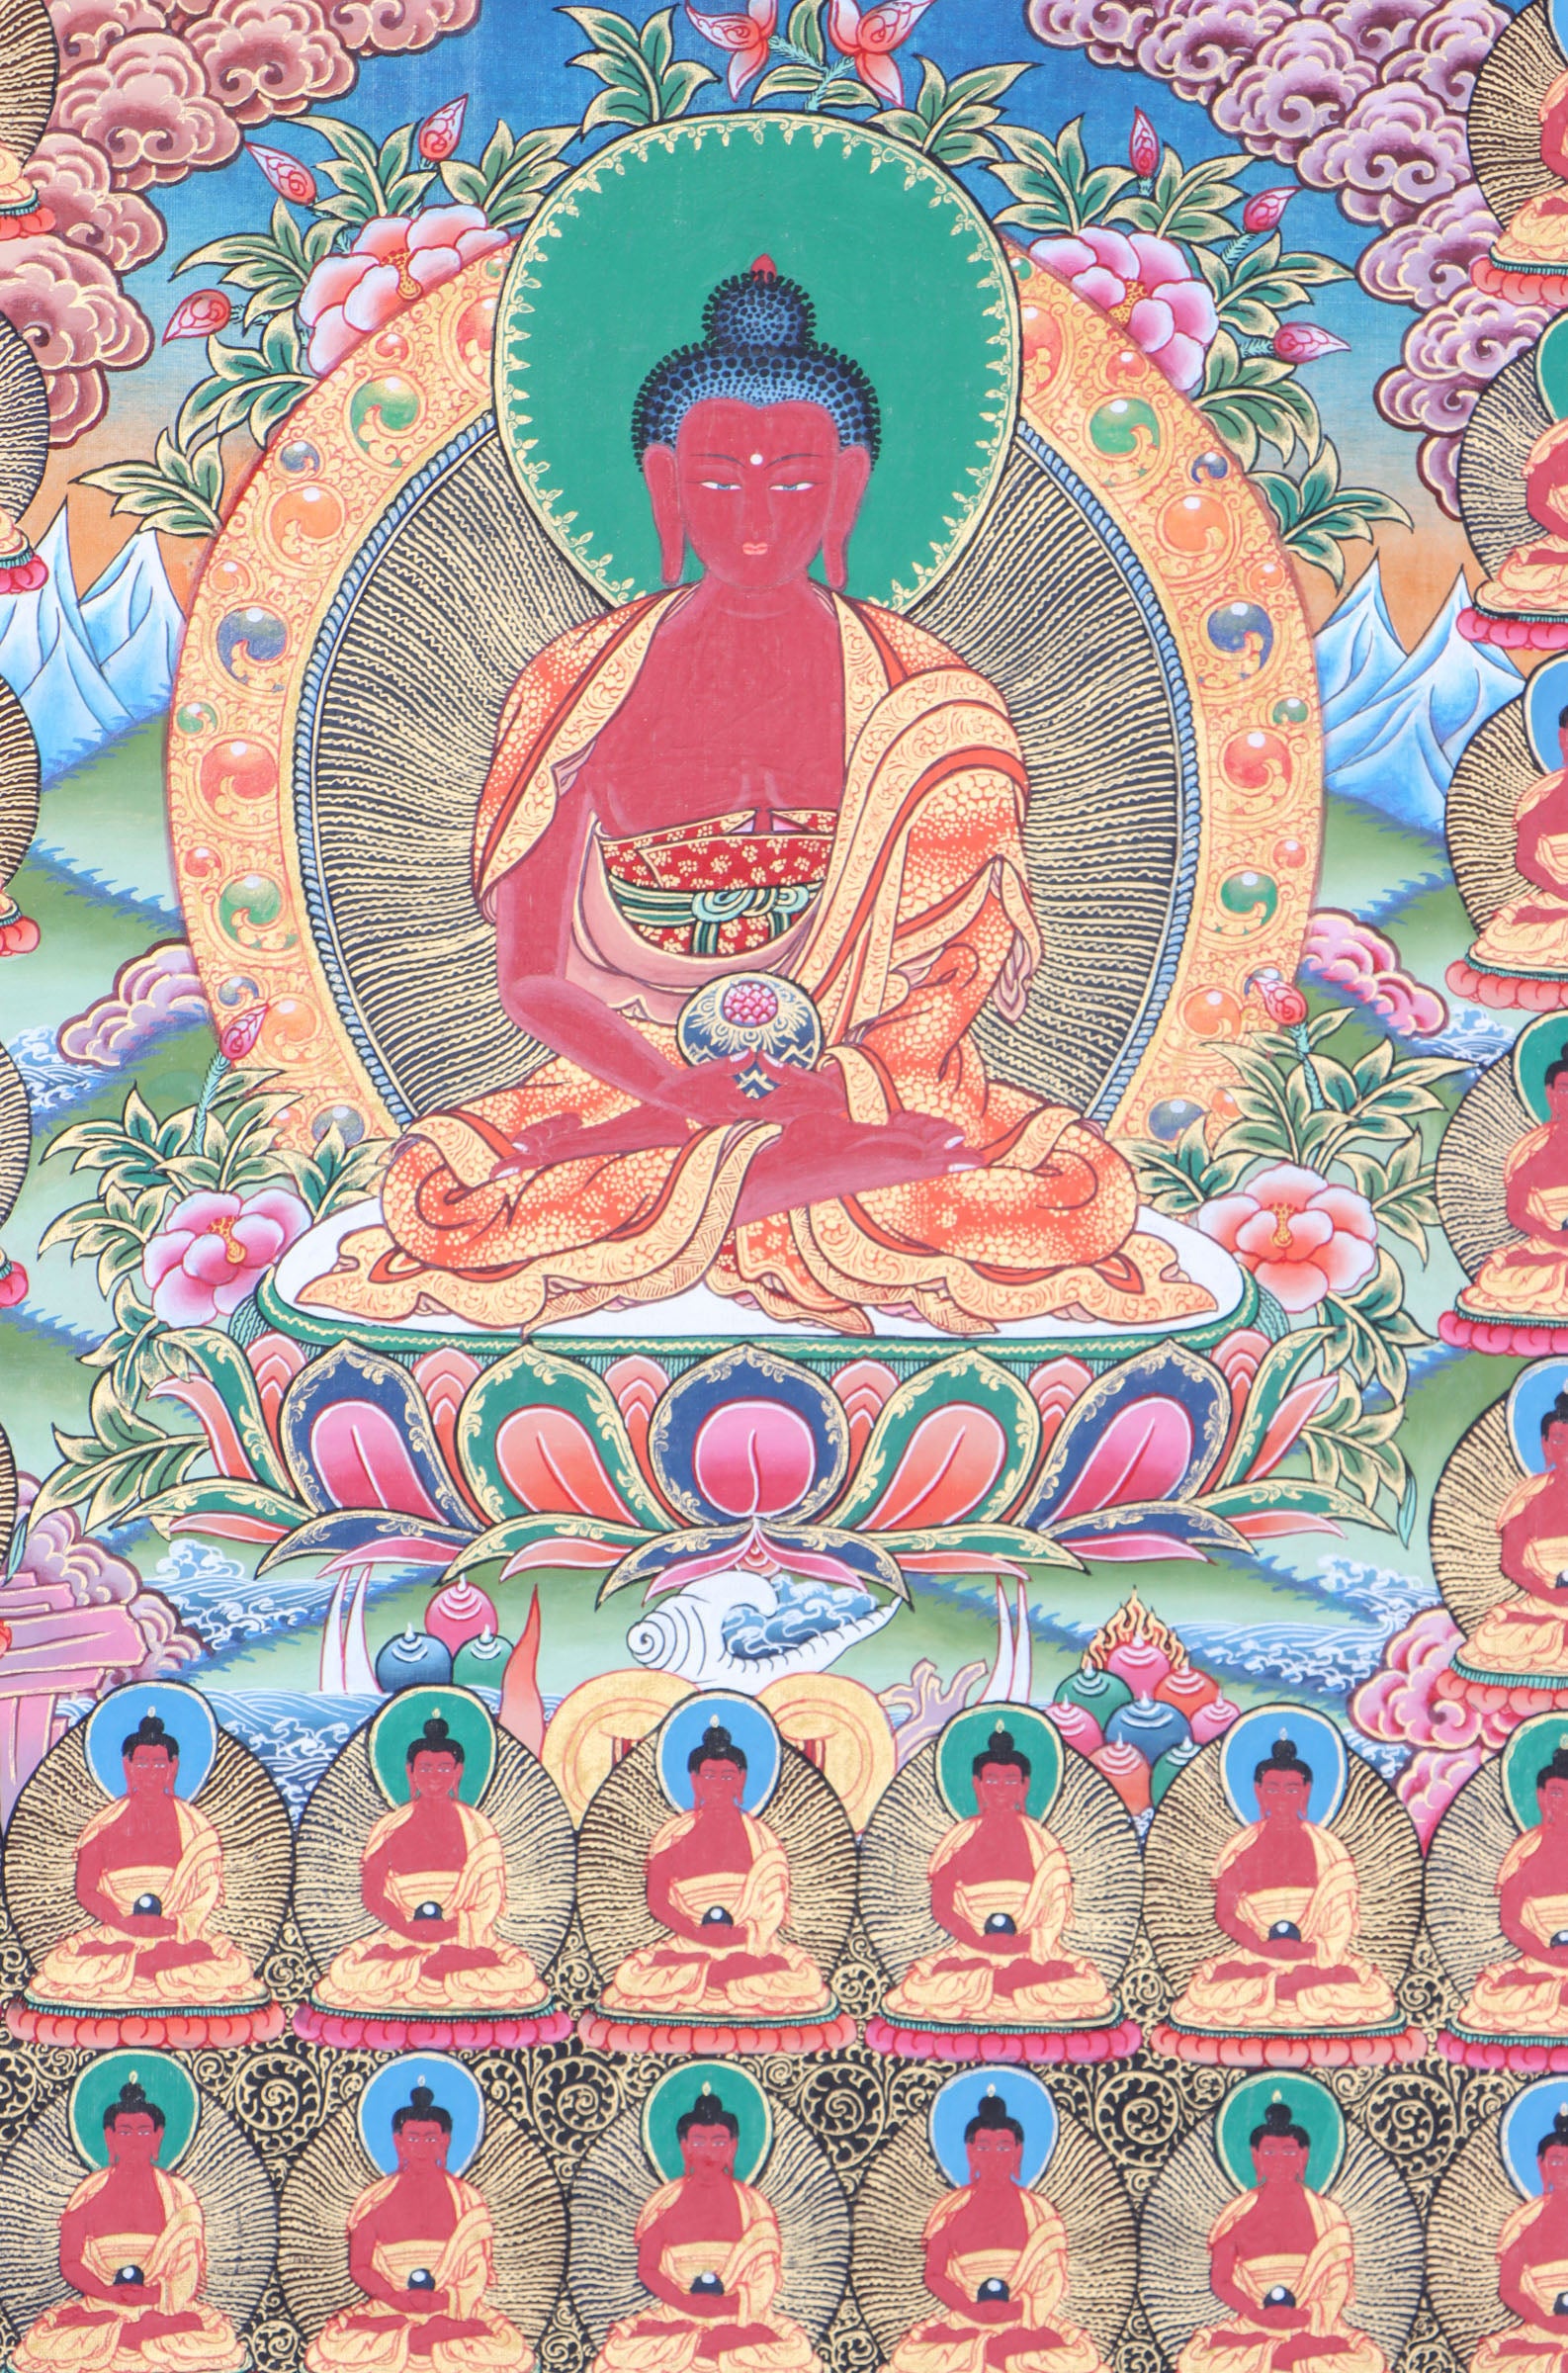 108 Buddha Thangka is an effective visual aid for meditation, contemplation, and devotion.